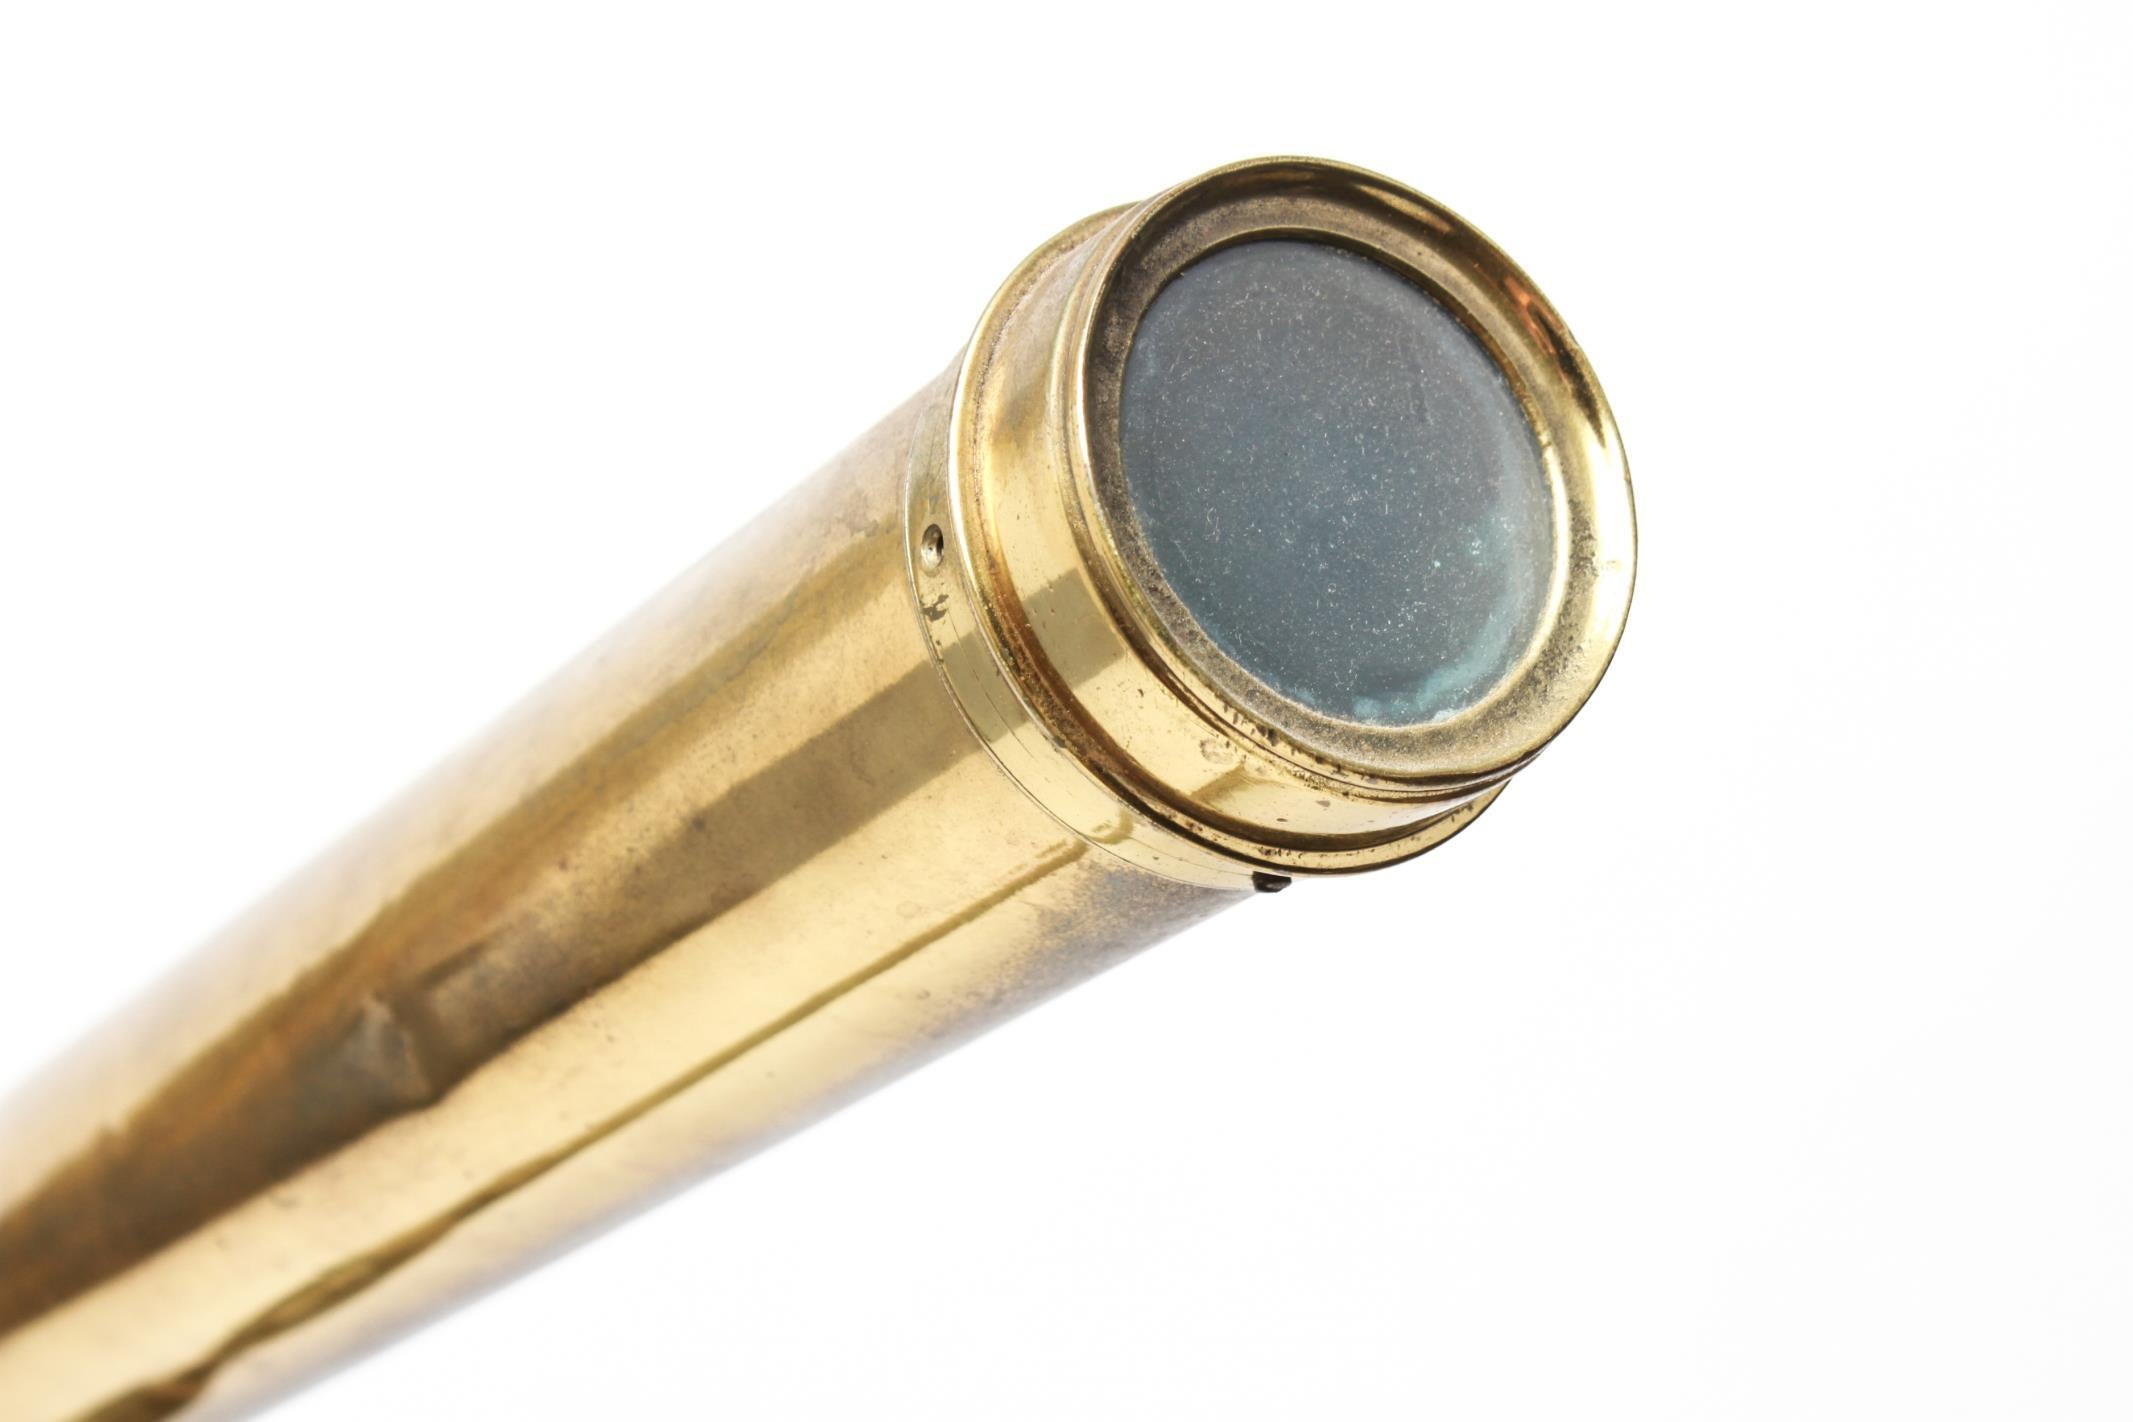 19th Century English Tabletop Telescope in Solid Brass